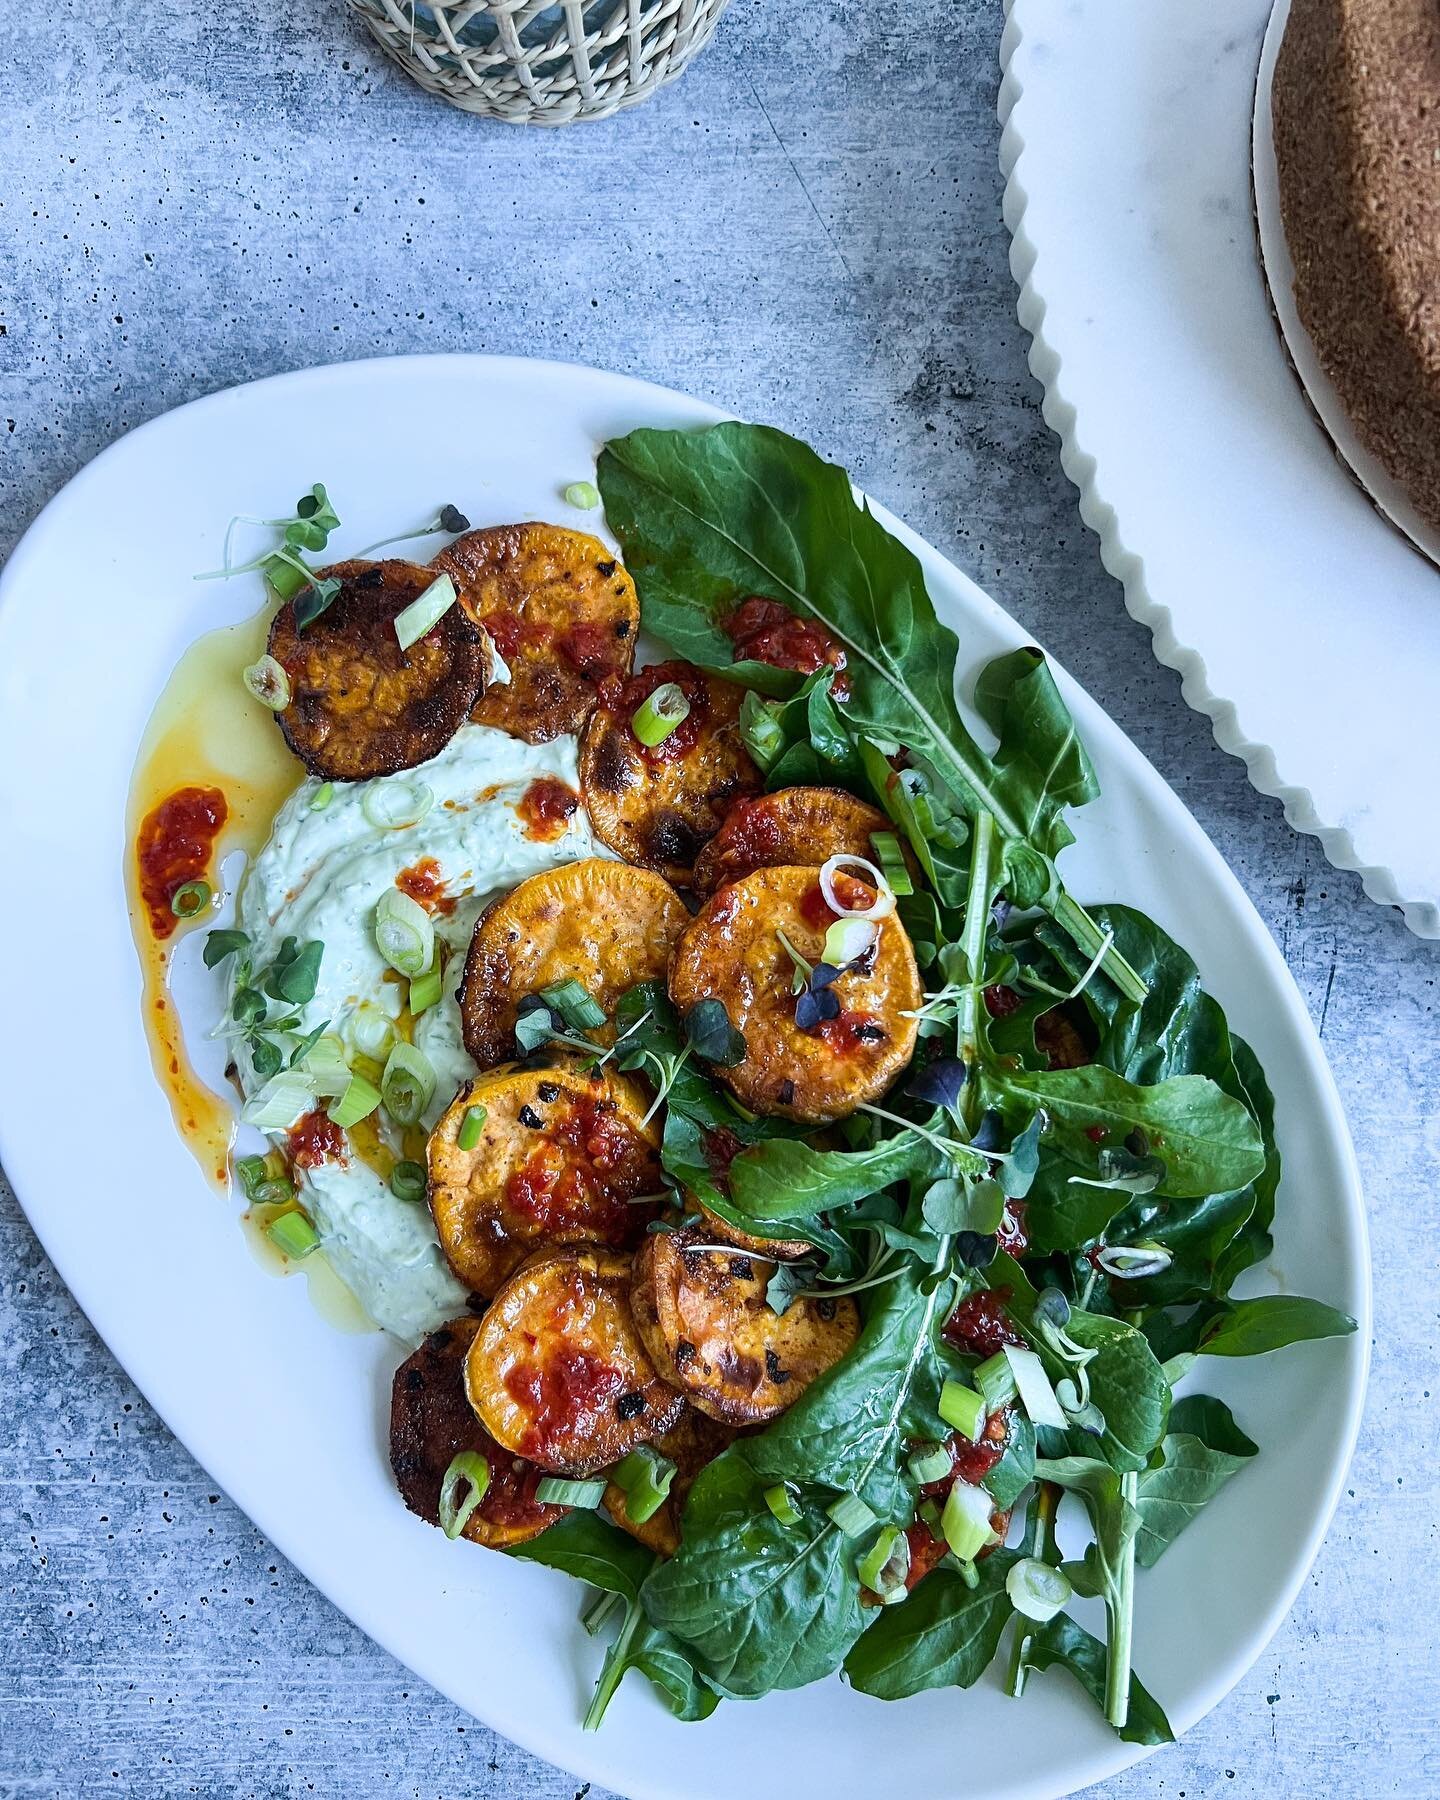 Harissa Roasted Sweet Potatoes, Herbed Yogurt, Arugula, Citrus Vinaigrette 

As promised, sharing some easy dinner ideas with greens I&rsquo;ve been growing in my garden. You could easily add a protein like grilled shrimp or tofu to this or serve as 